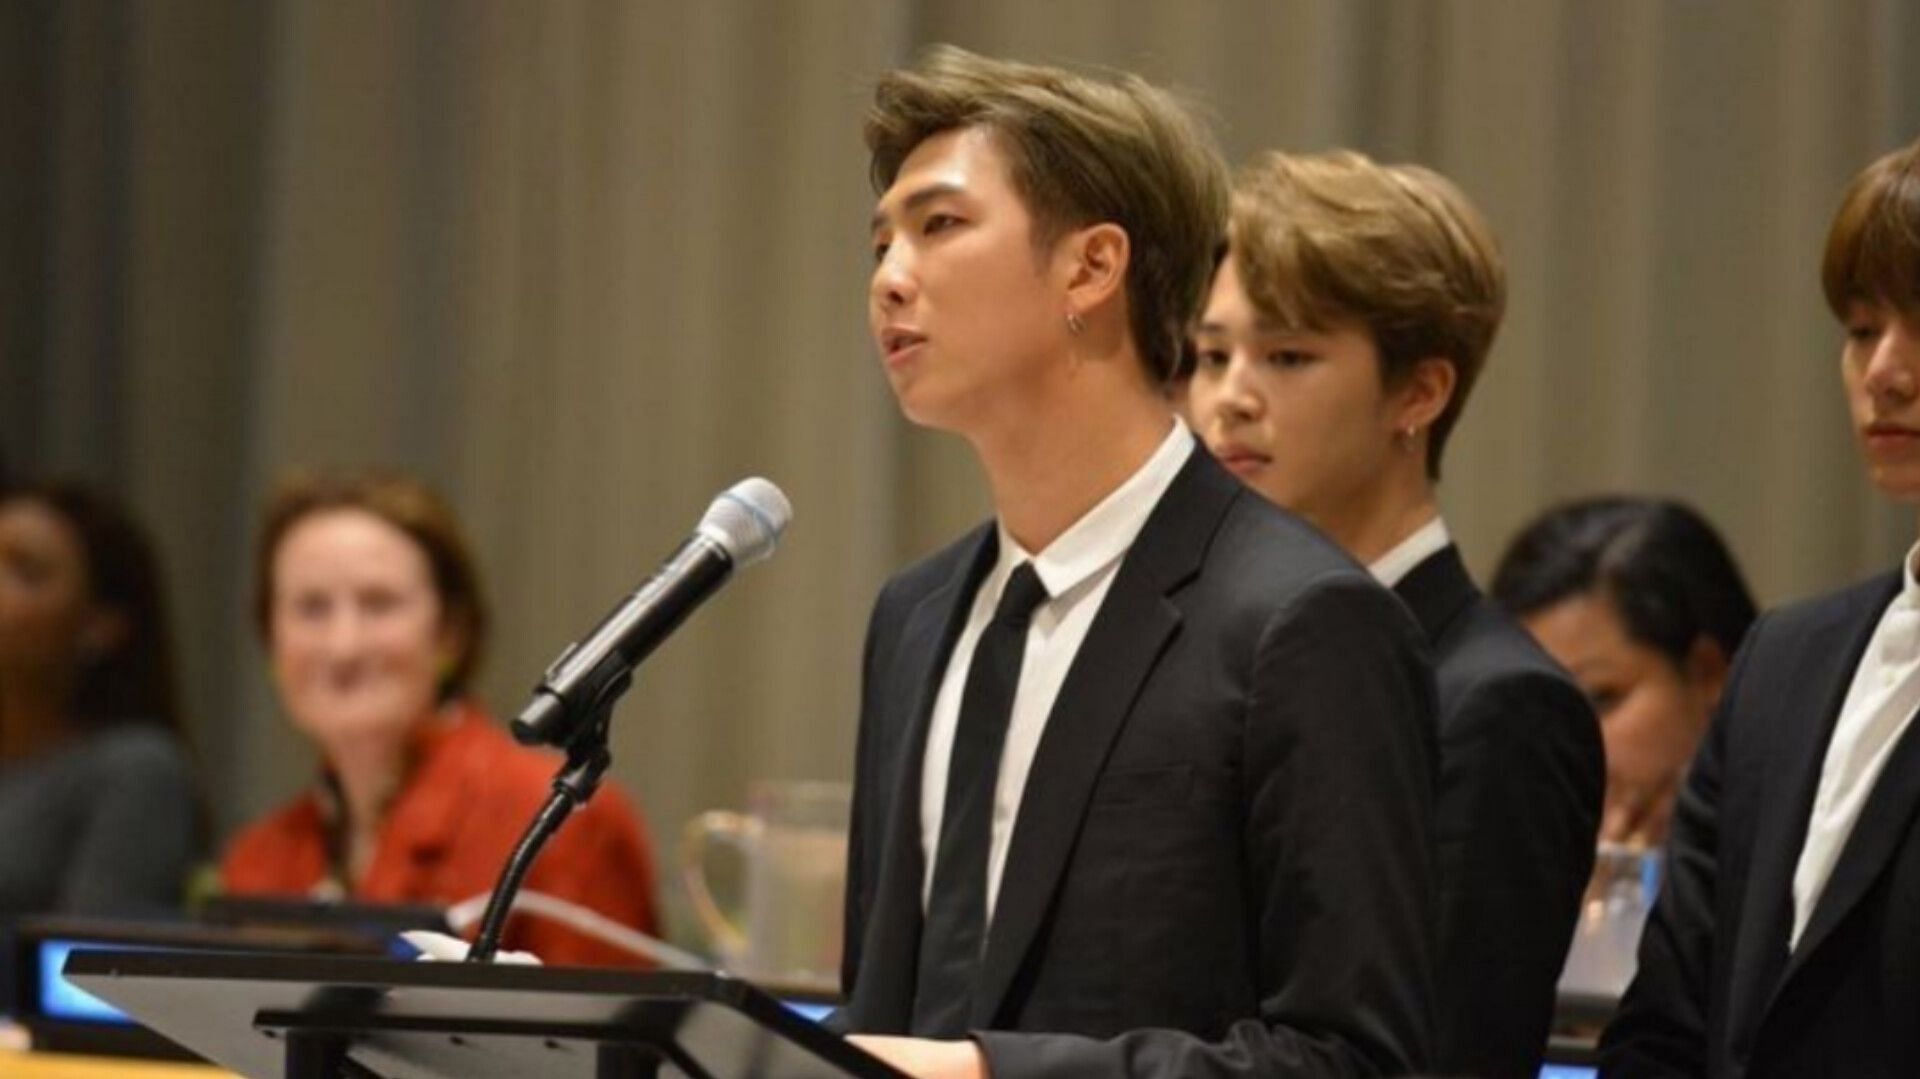 BTS RM Appointed as Honorary Ambassador for Ministry of National Defense  for Agency KIA Recovery & Identification - KPOPPOST